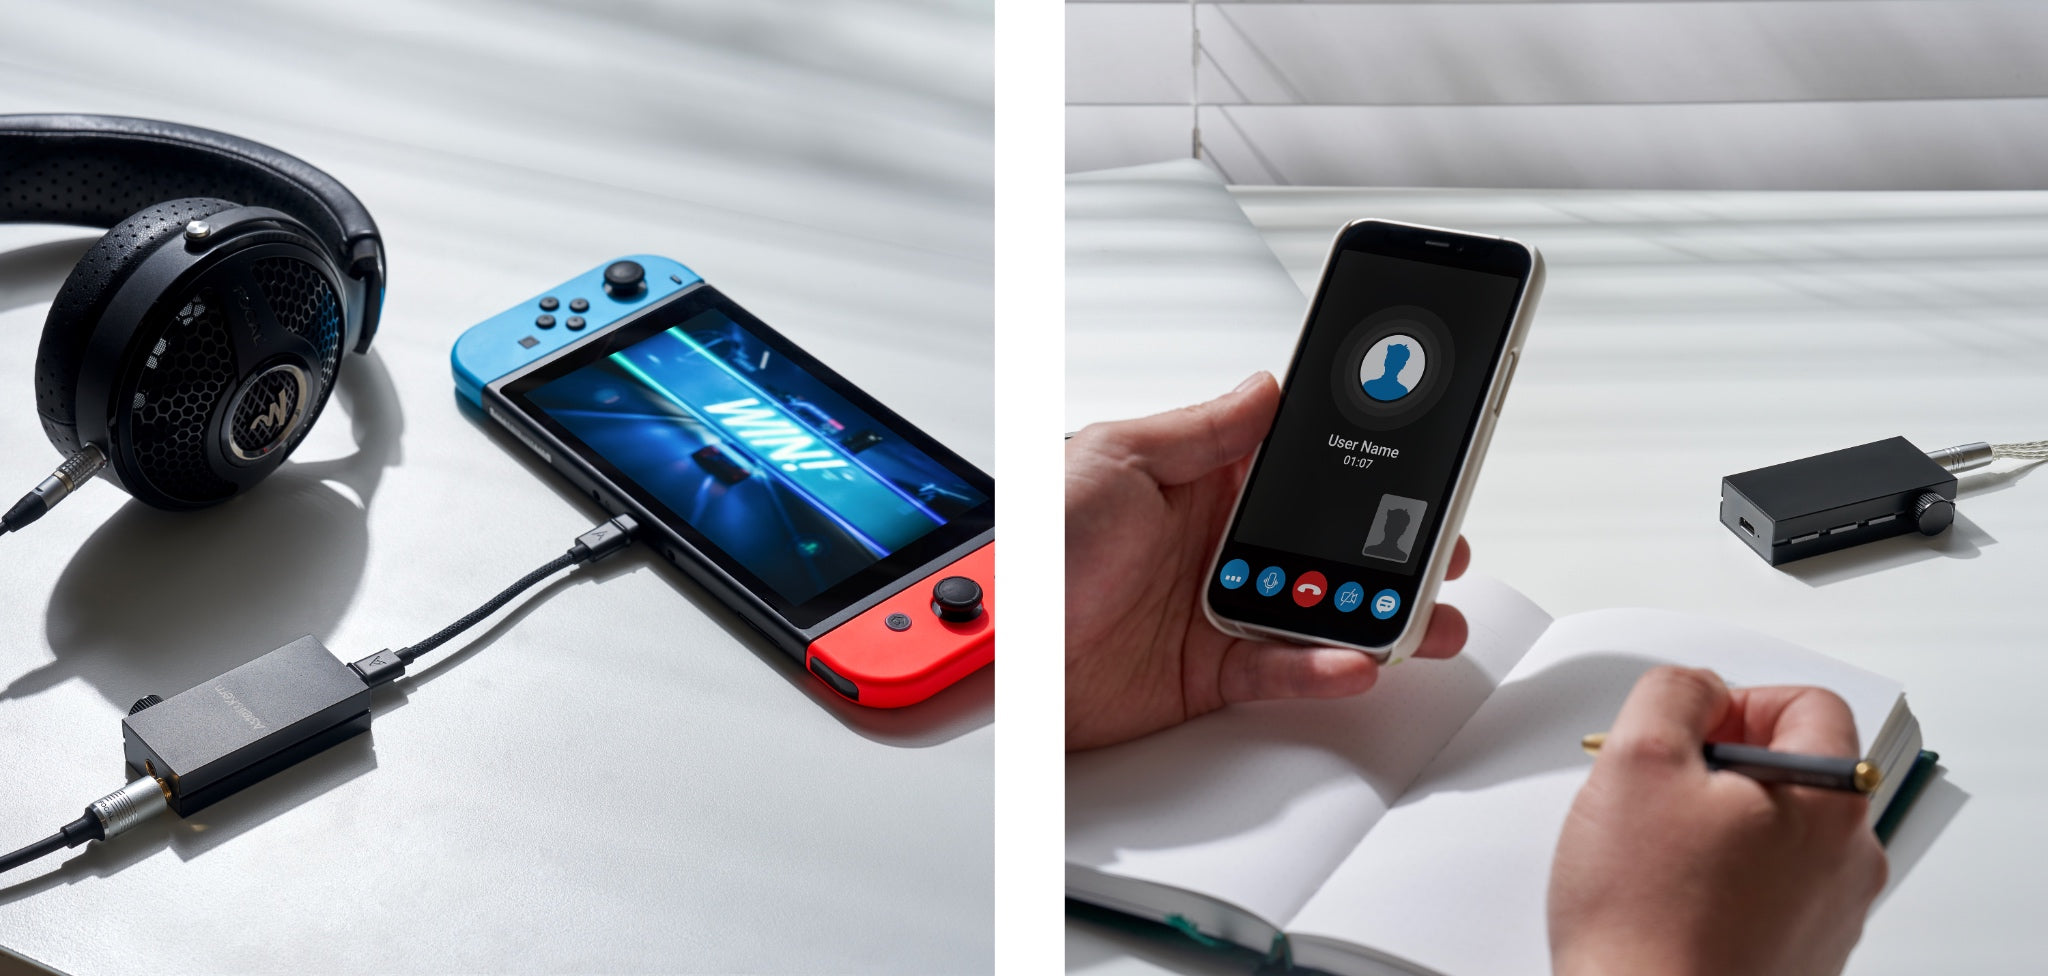 Astell&Kern AK HB1 thumbnails displaying attached Nintendo Switch, Focal headphones and Bluetooth connection to iPhone